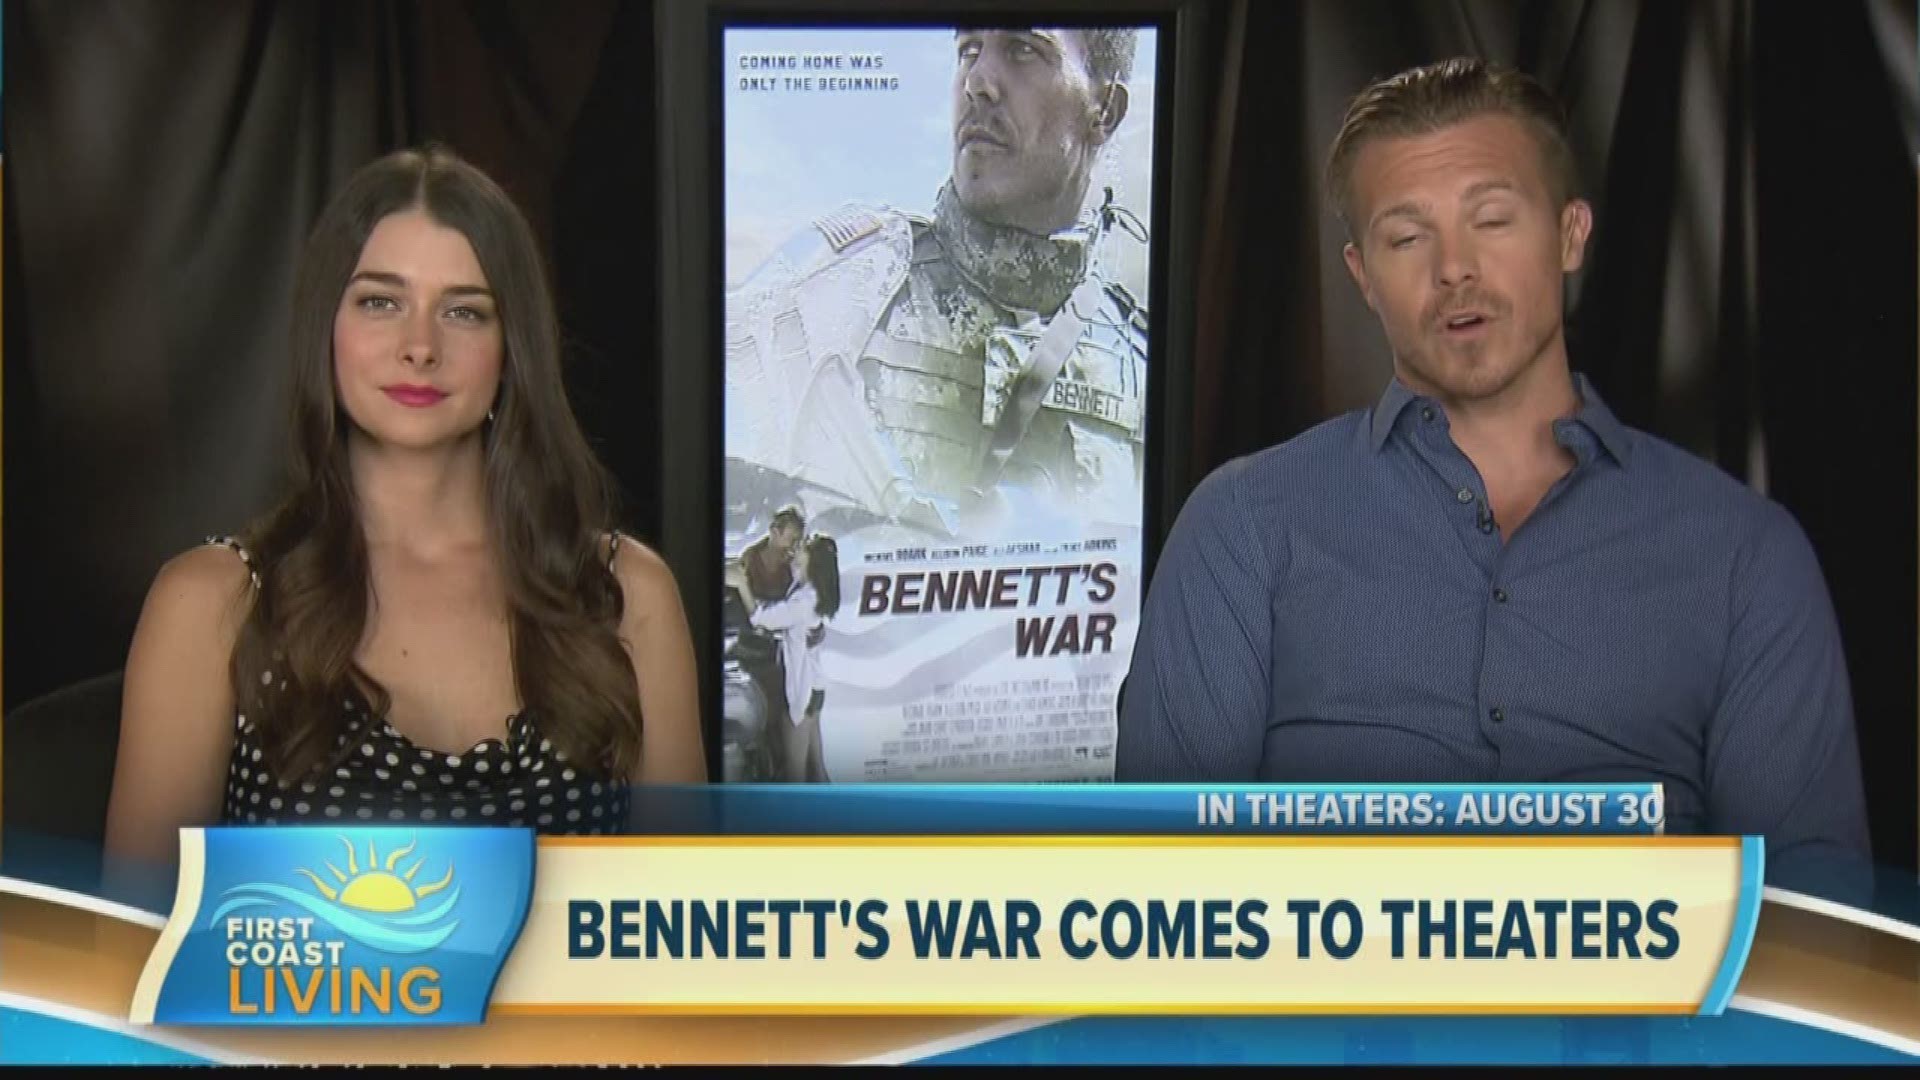 Catch the all-new family drama Bennett's War when it hits theaters nationwide August 30.